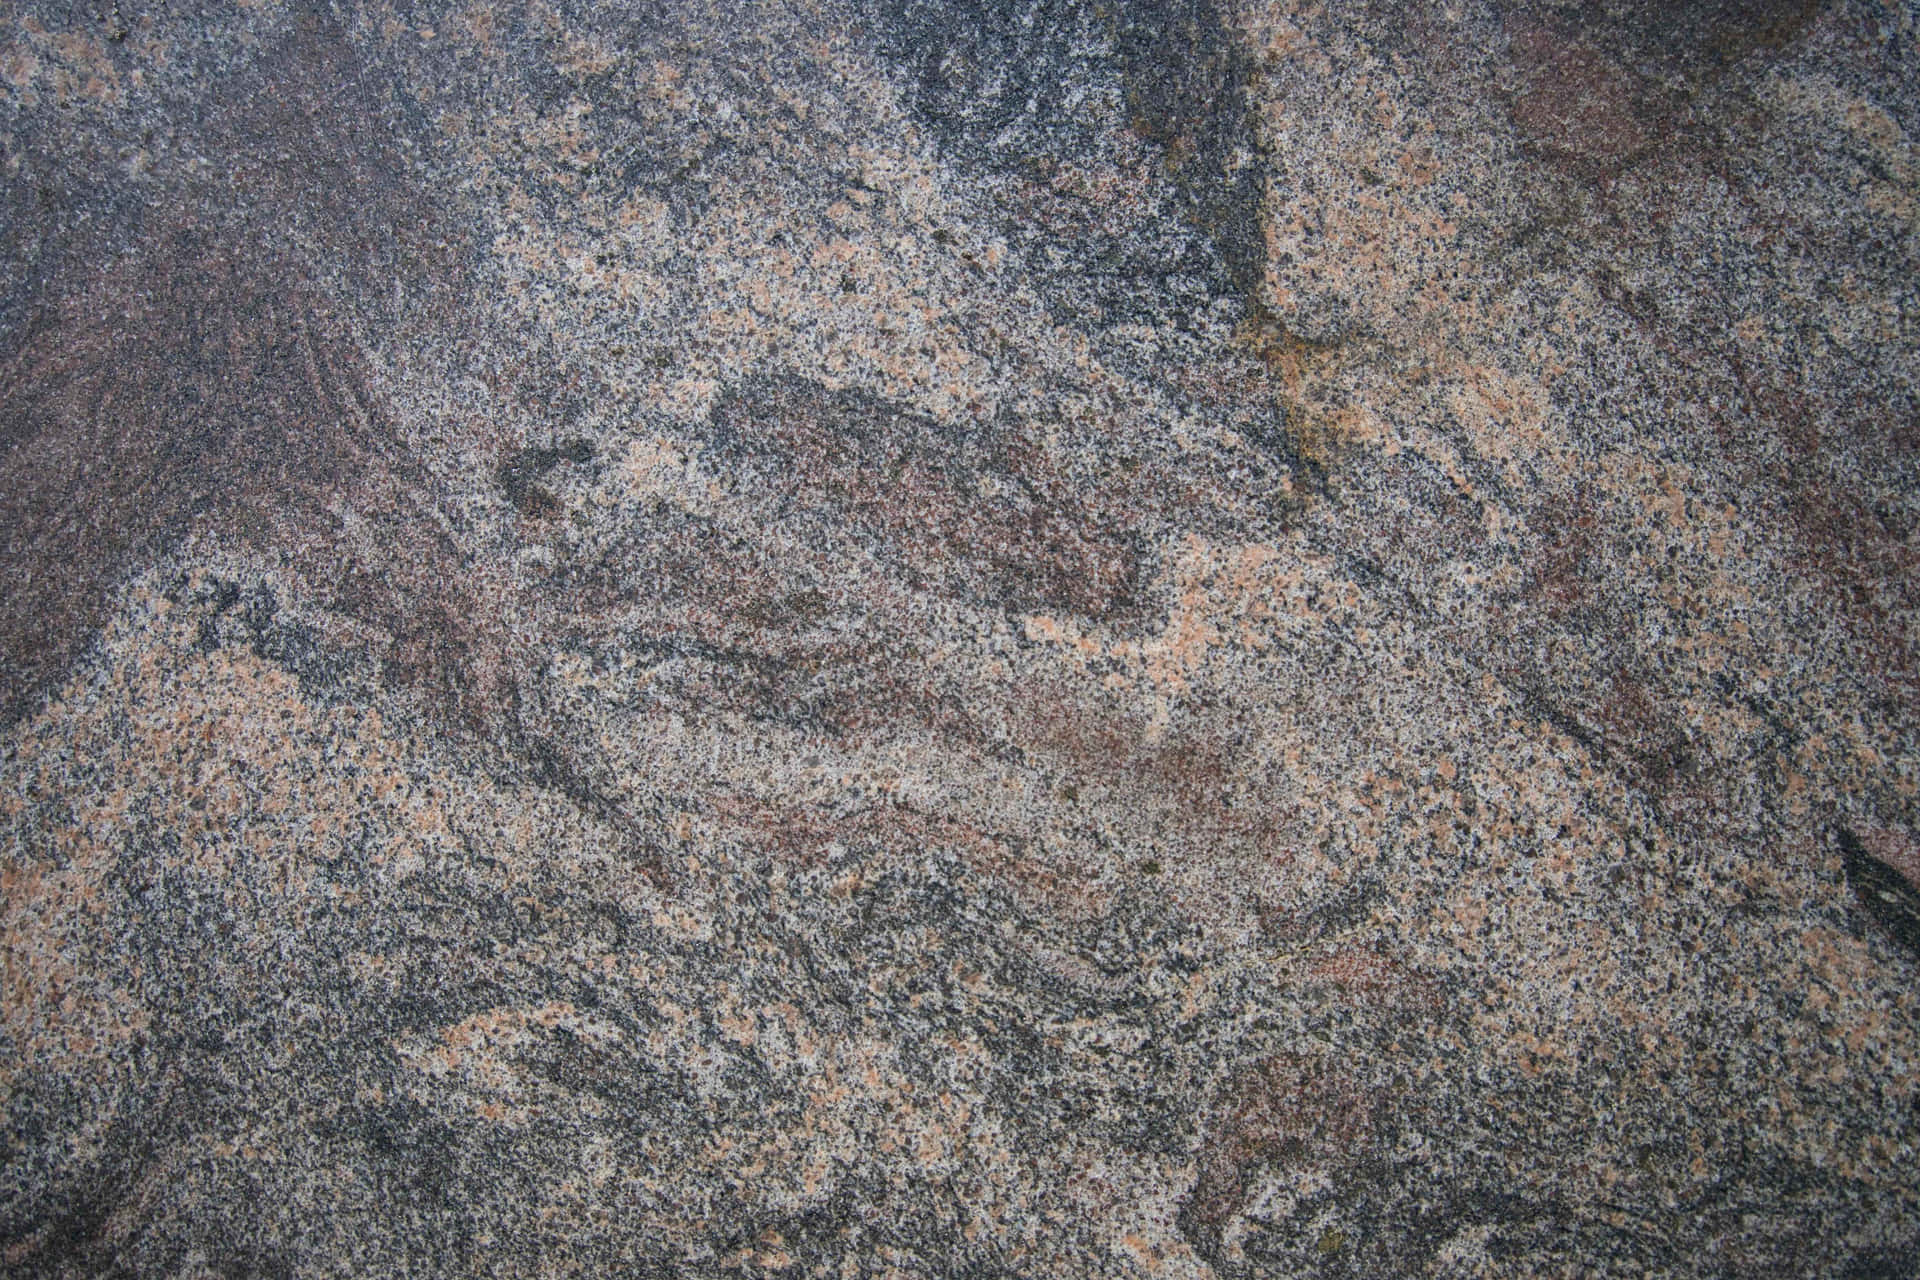 "Natural Beauty - A Granite Background"